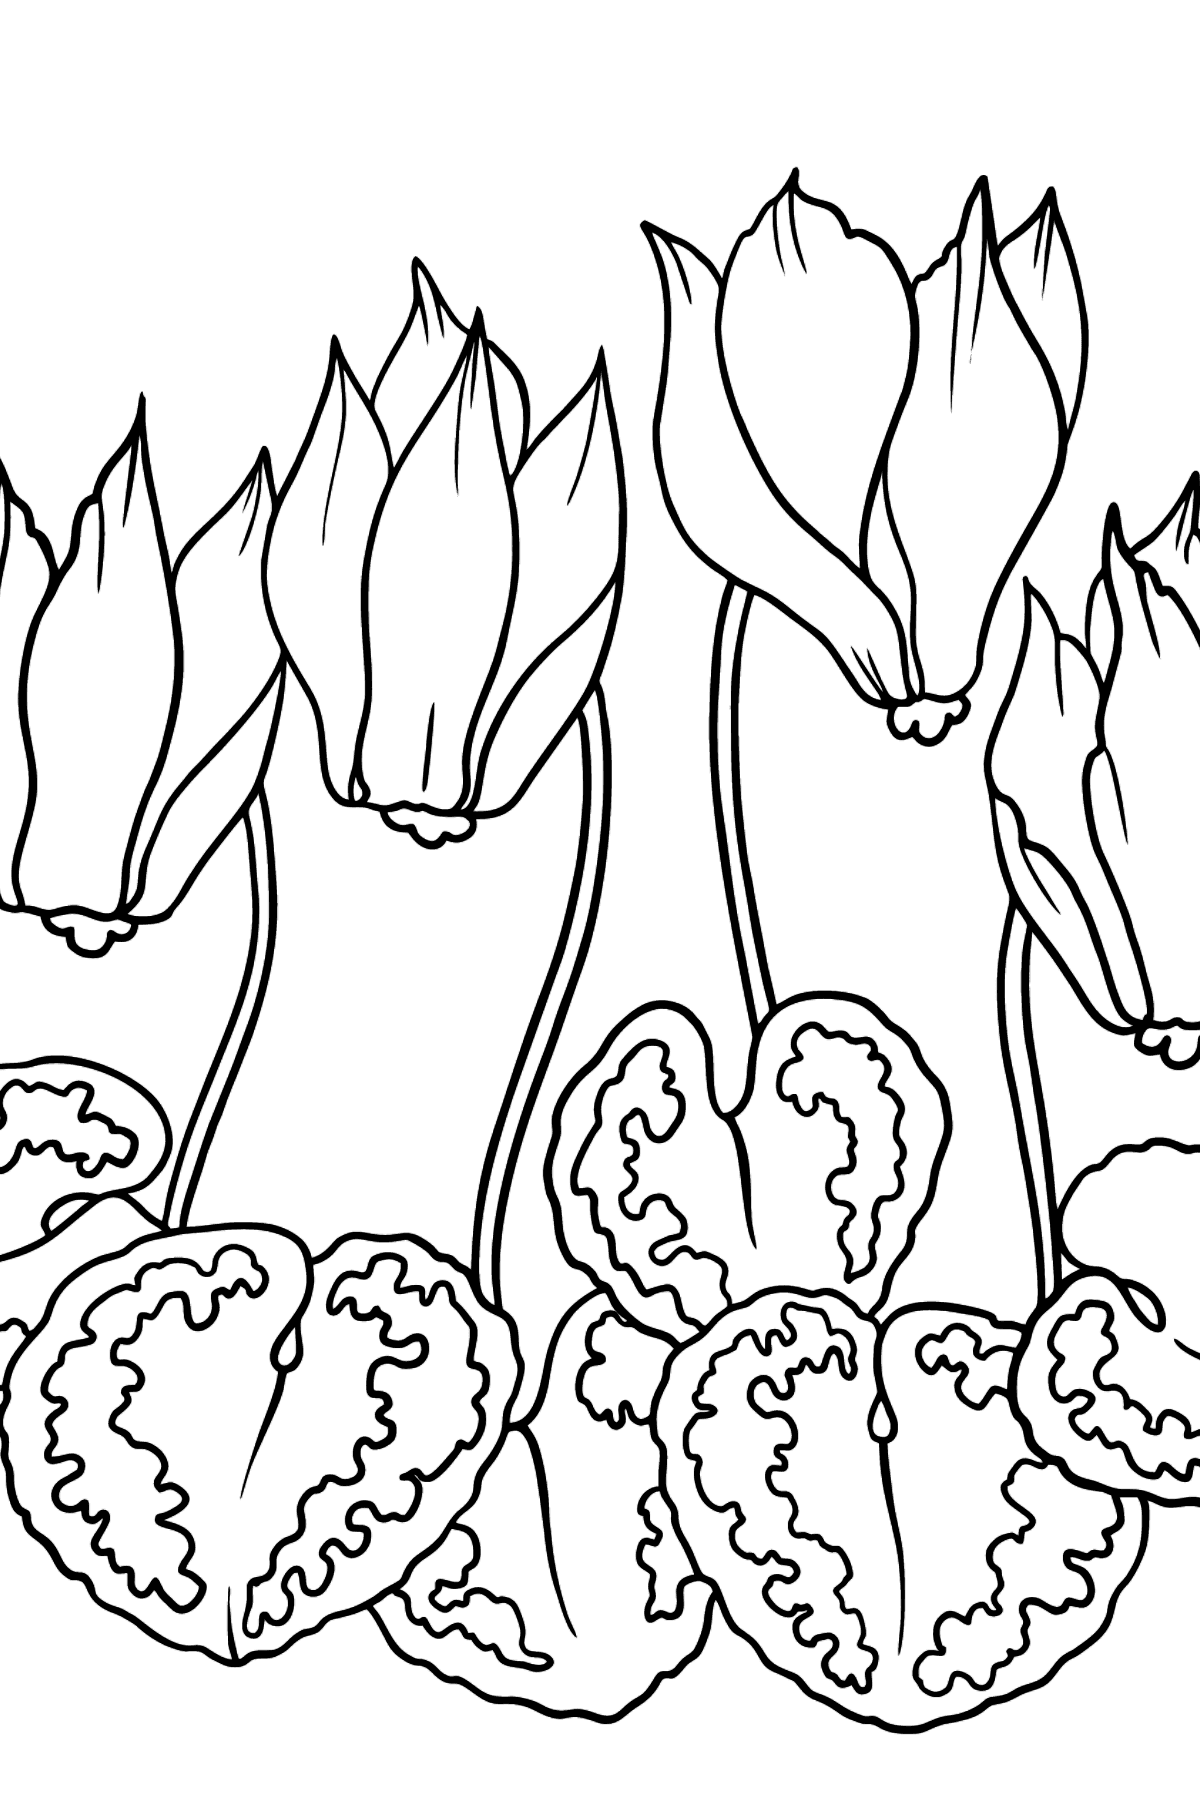 Flower Coloring Page - A Red and Pink Cyclamen - Coloring Pages for Kids